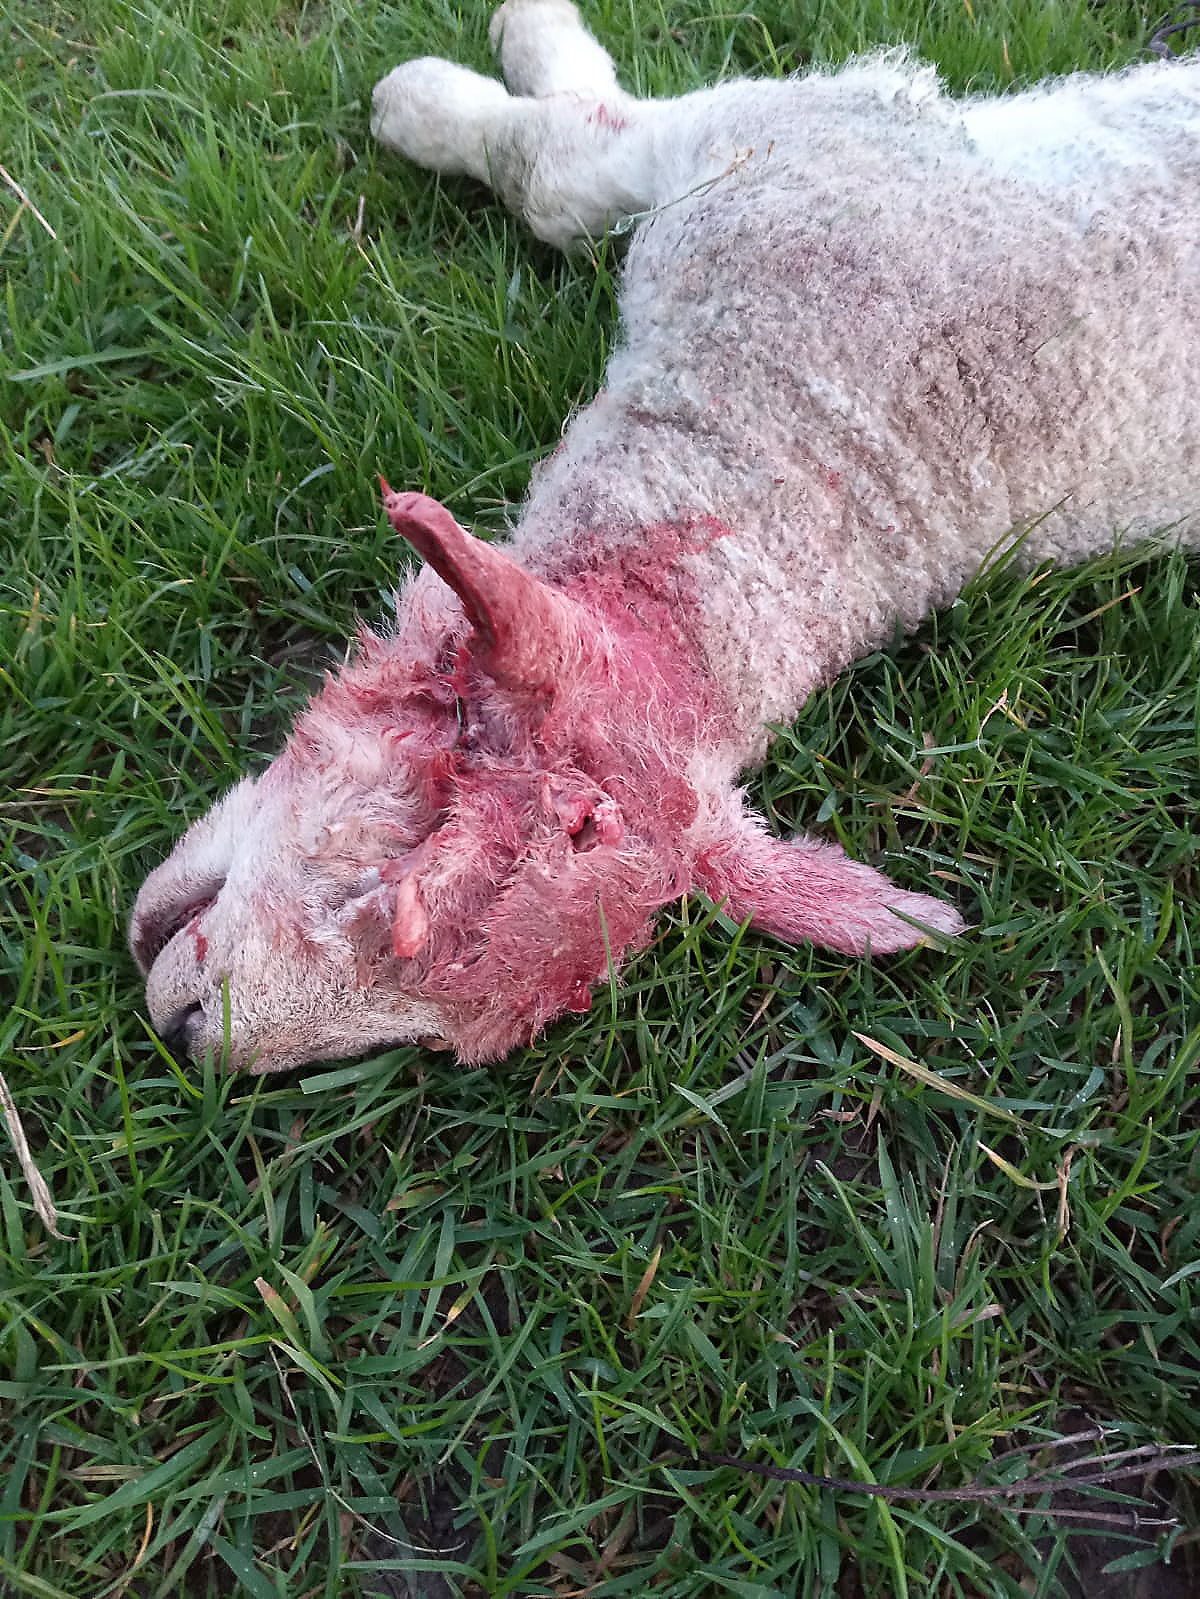 lamb killed by sheep worrying in Dorset